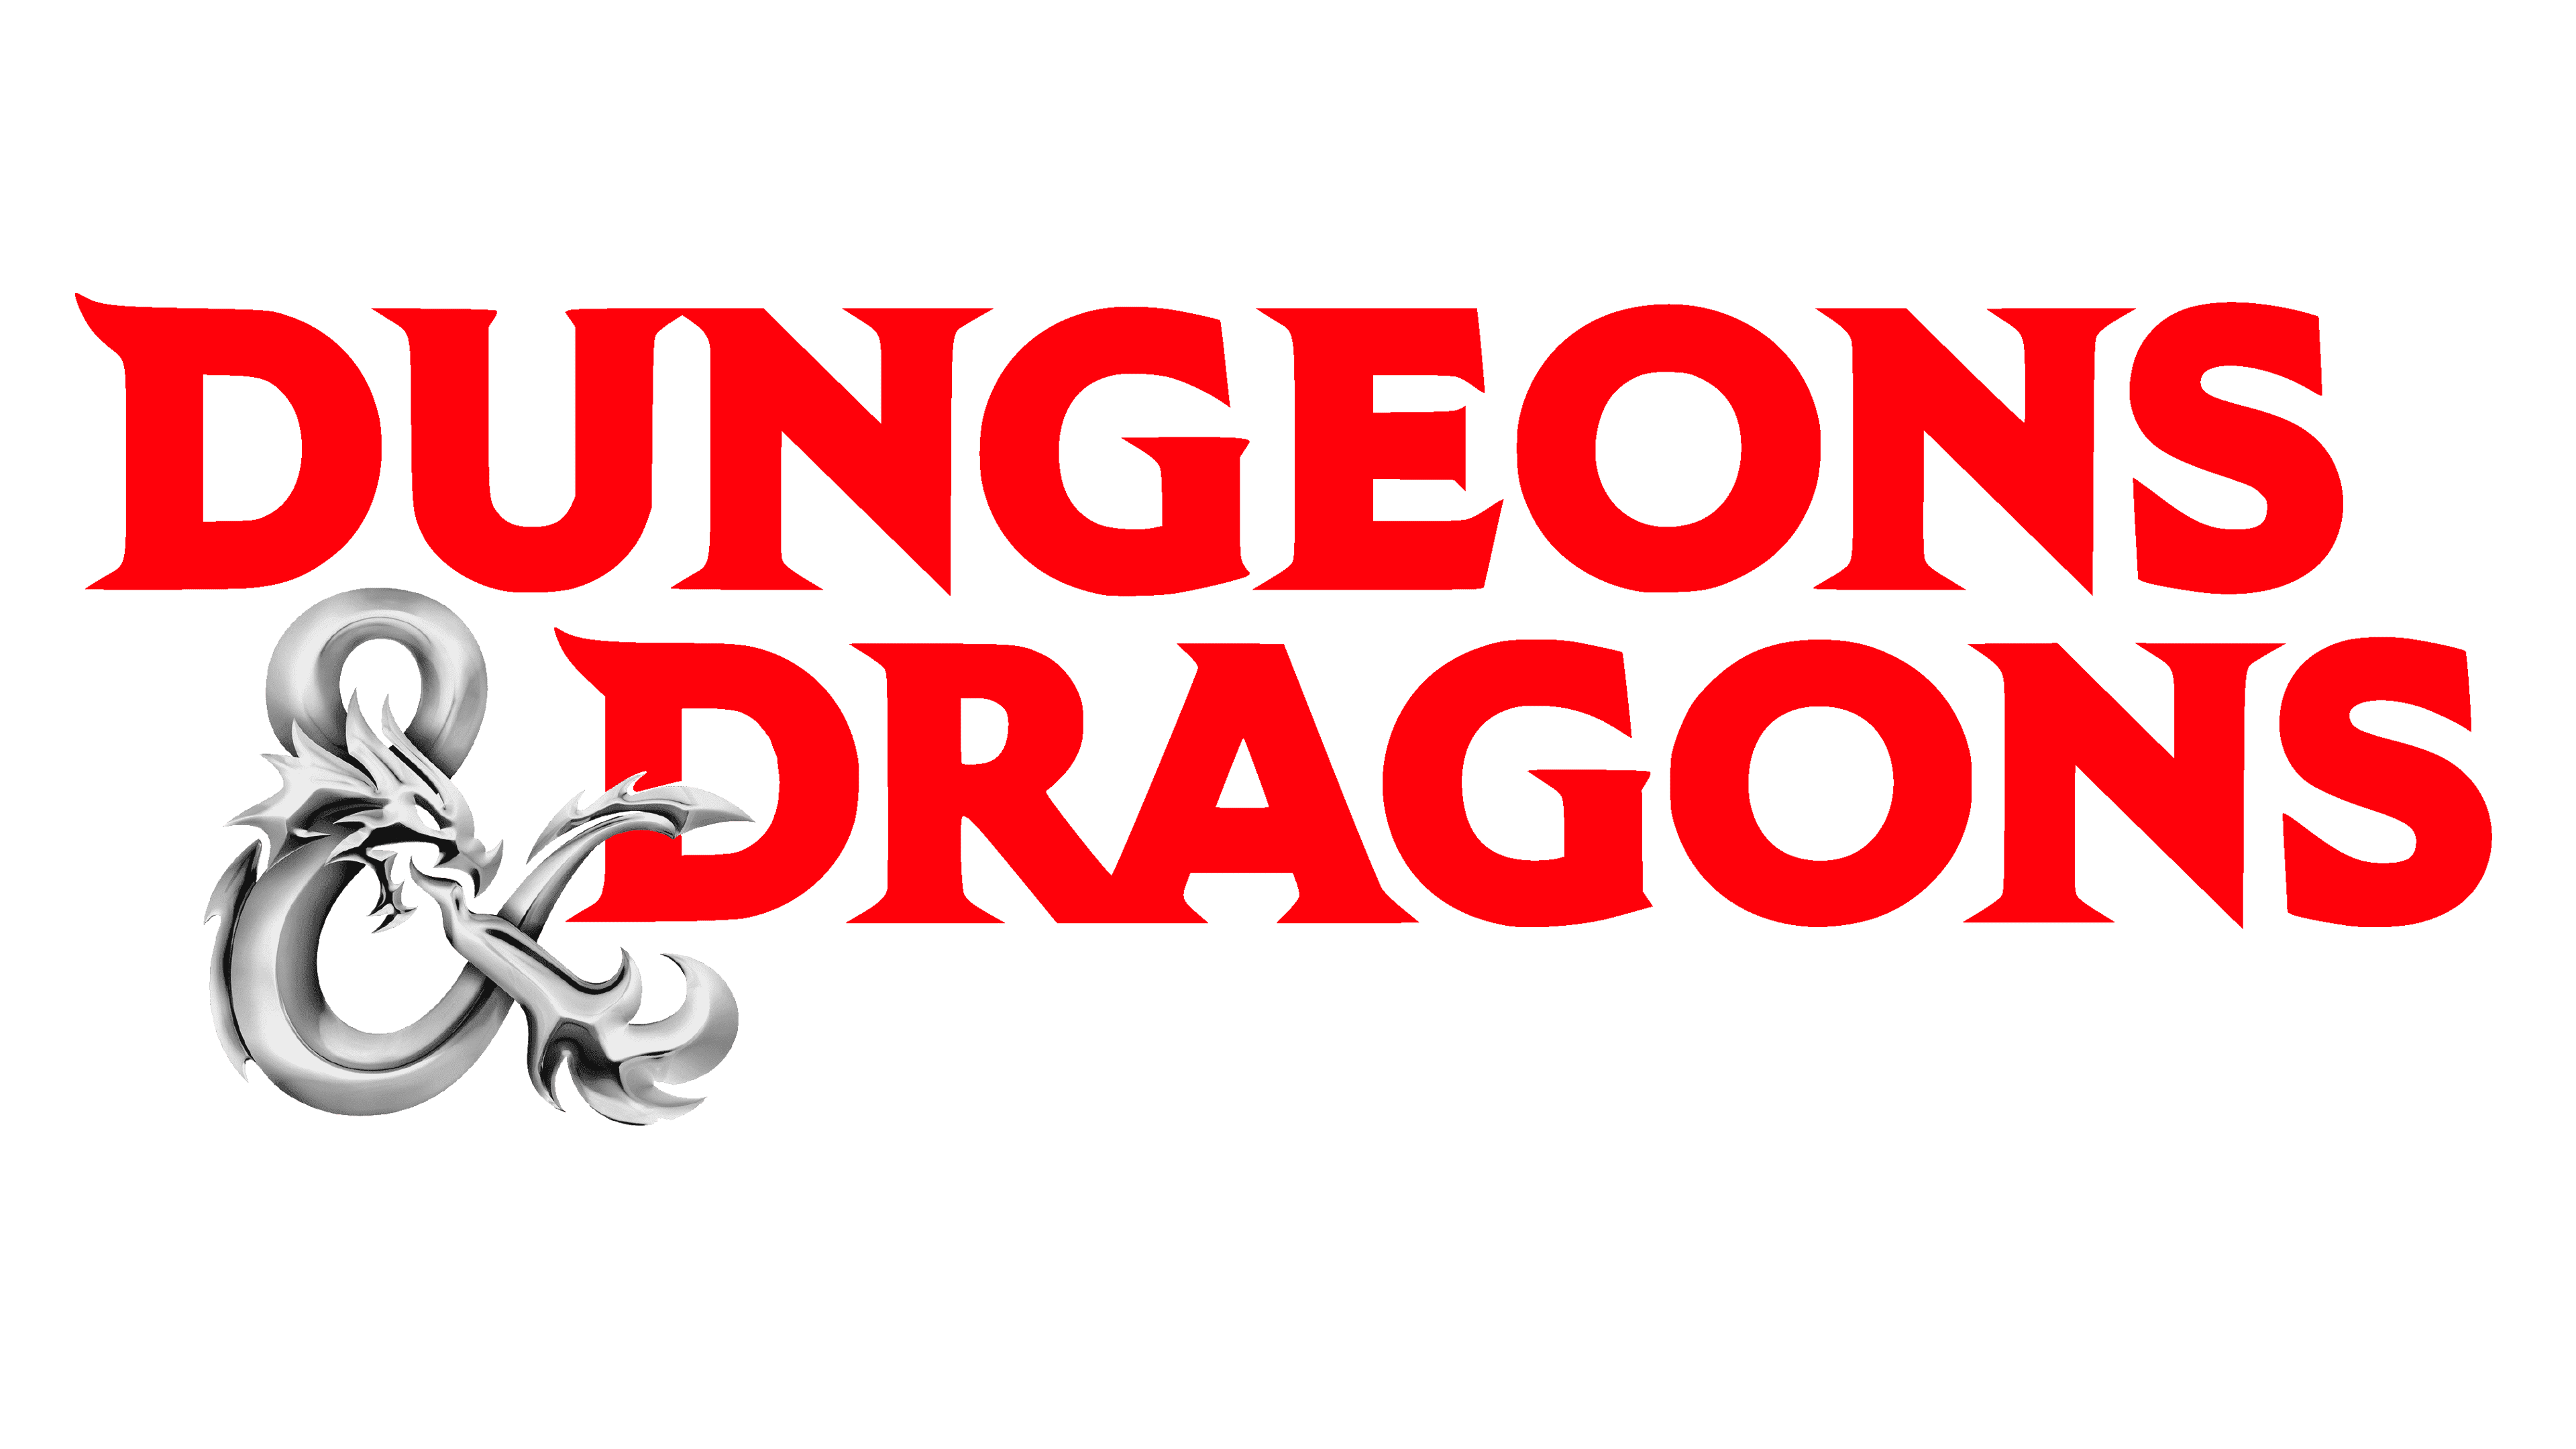 Dungeons & Dragons logo in red text